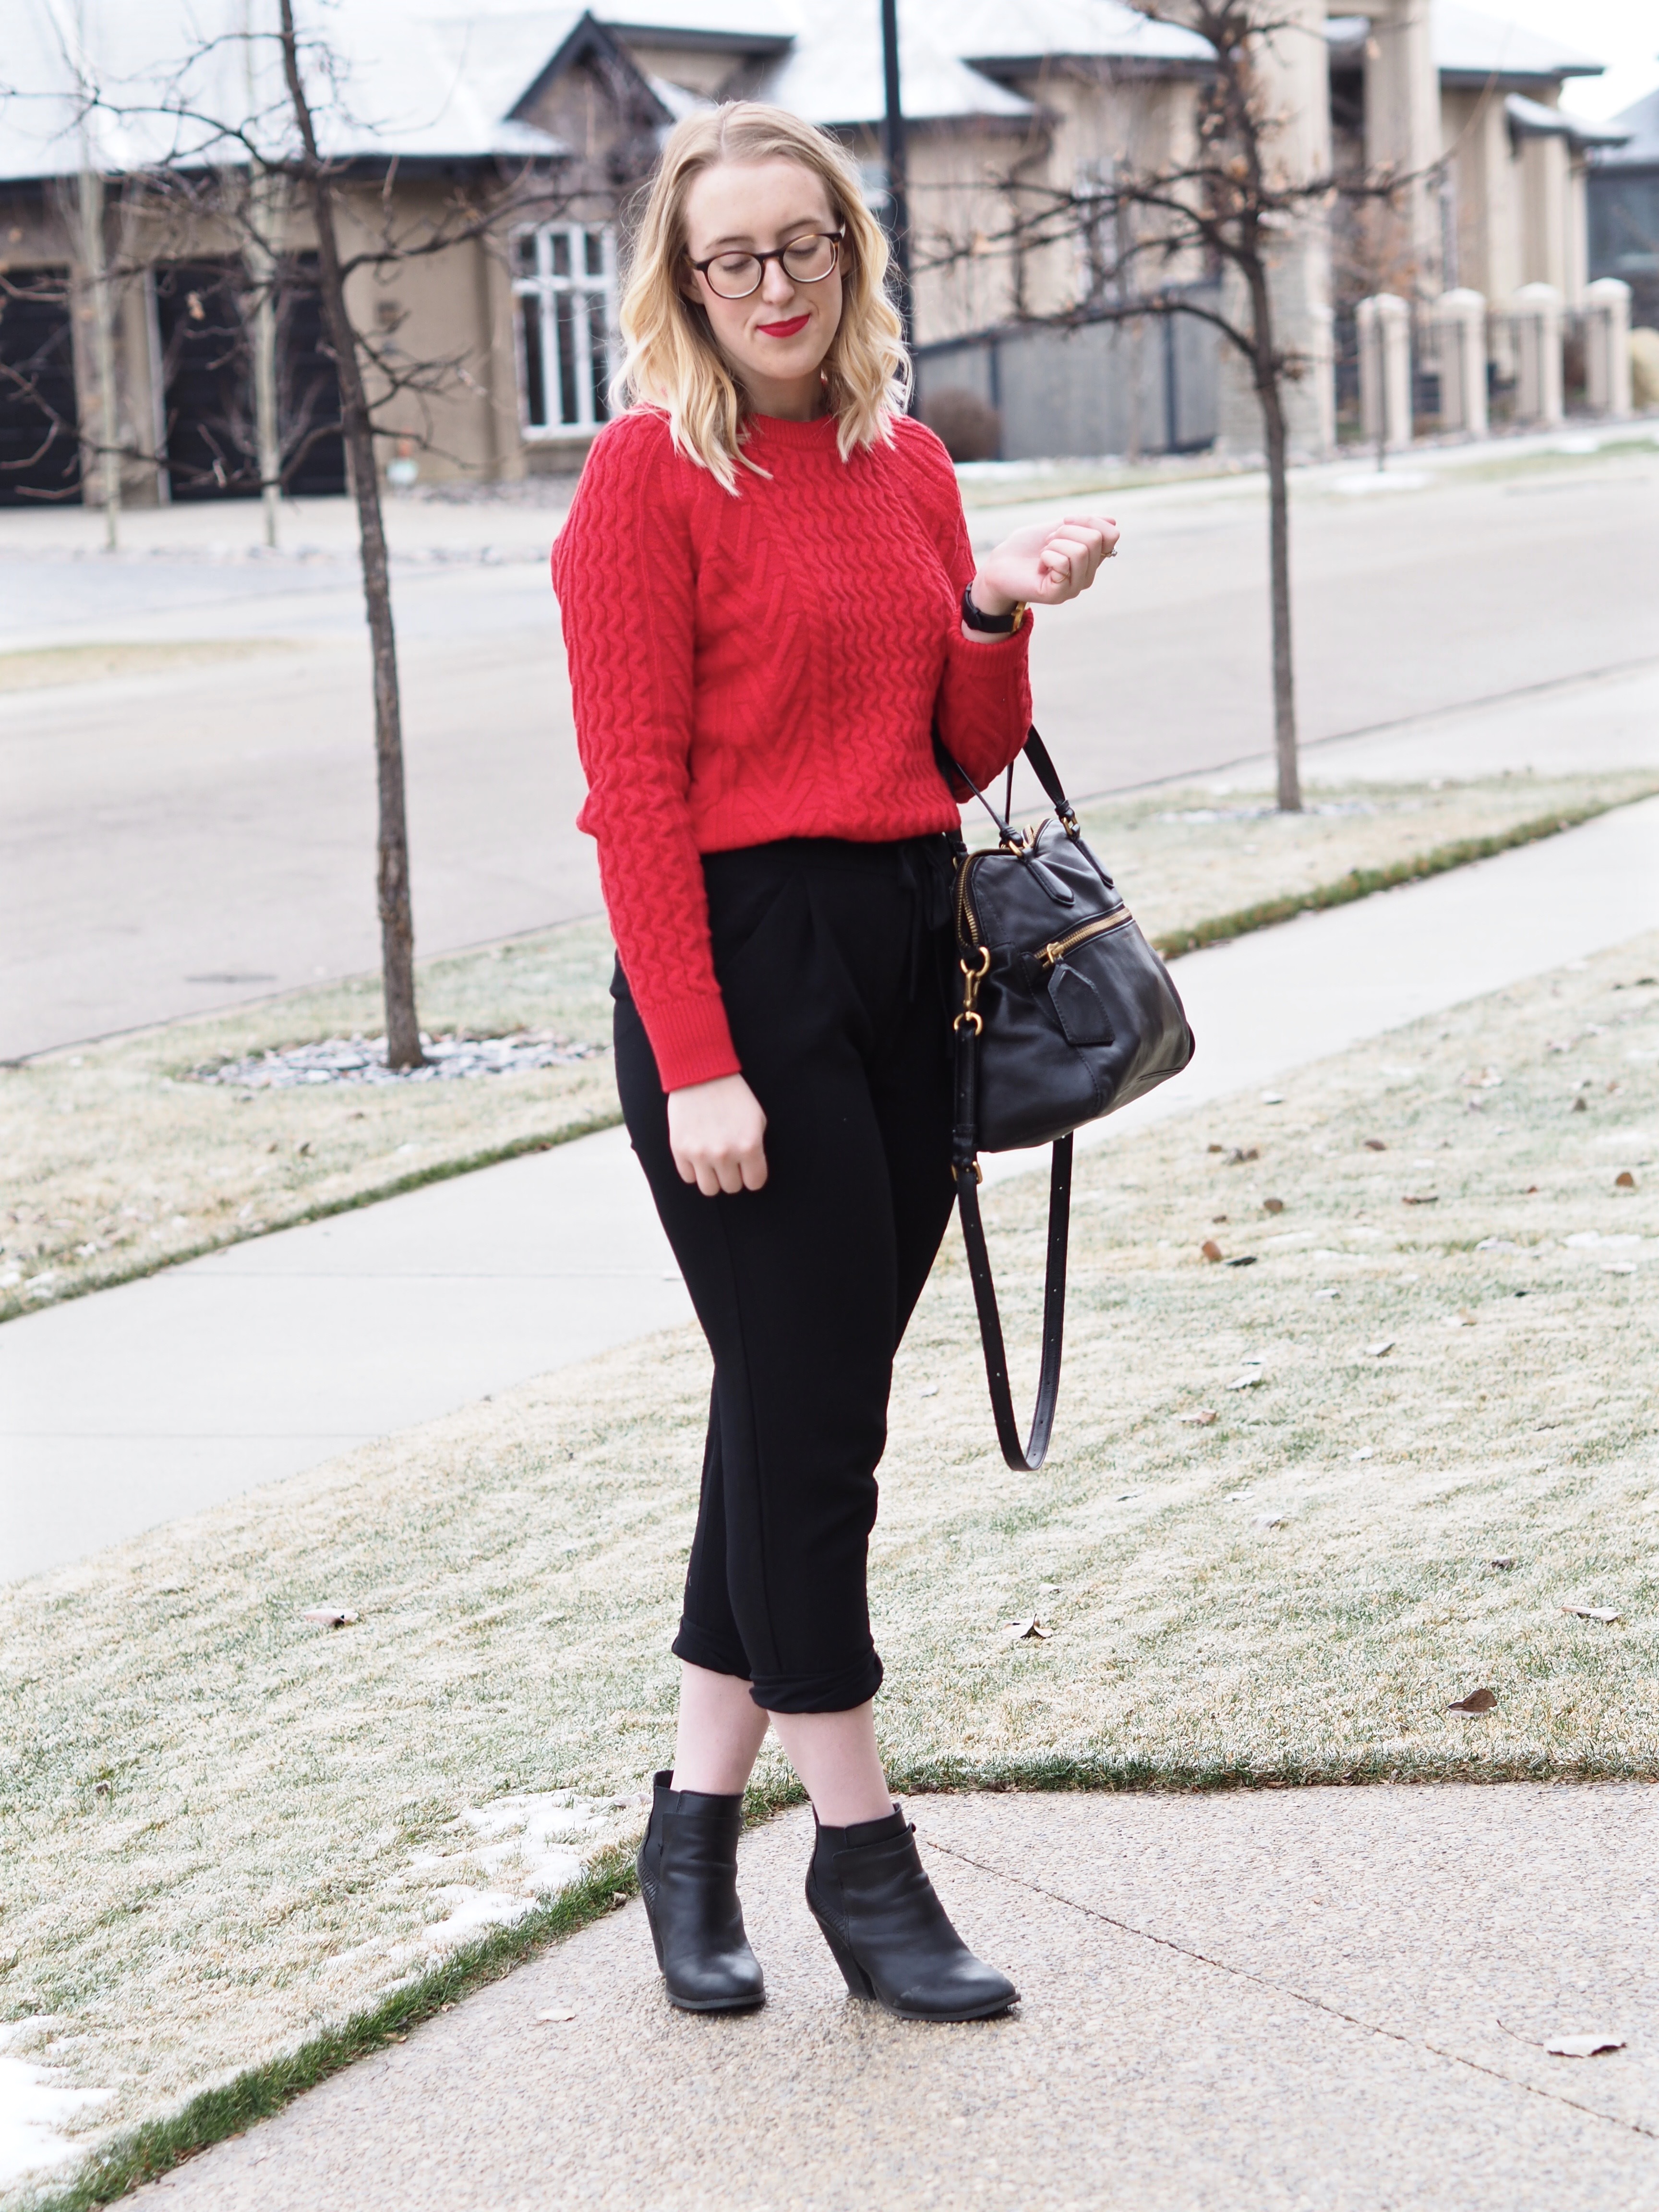 Red Cable Knit Sweater - Strung in Gold {Gap Sweater, Aritzia Joggers, Marc by Marc Jacobs Purse, Aldo Booties, MAC Lipstick}